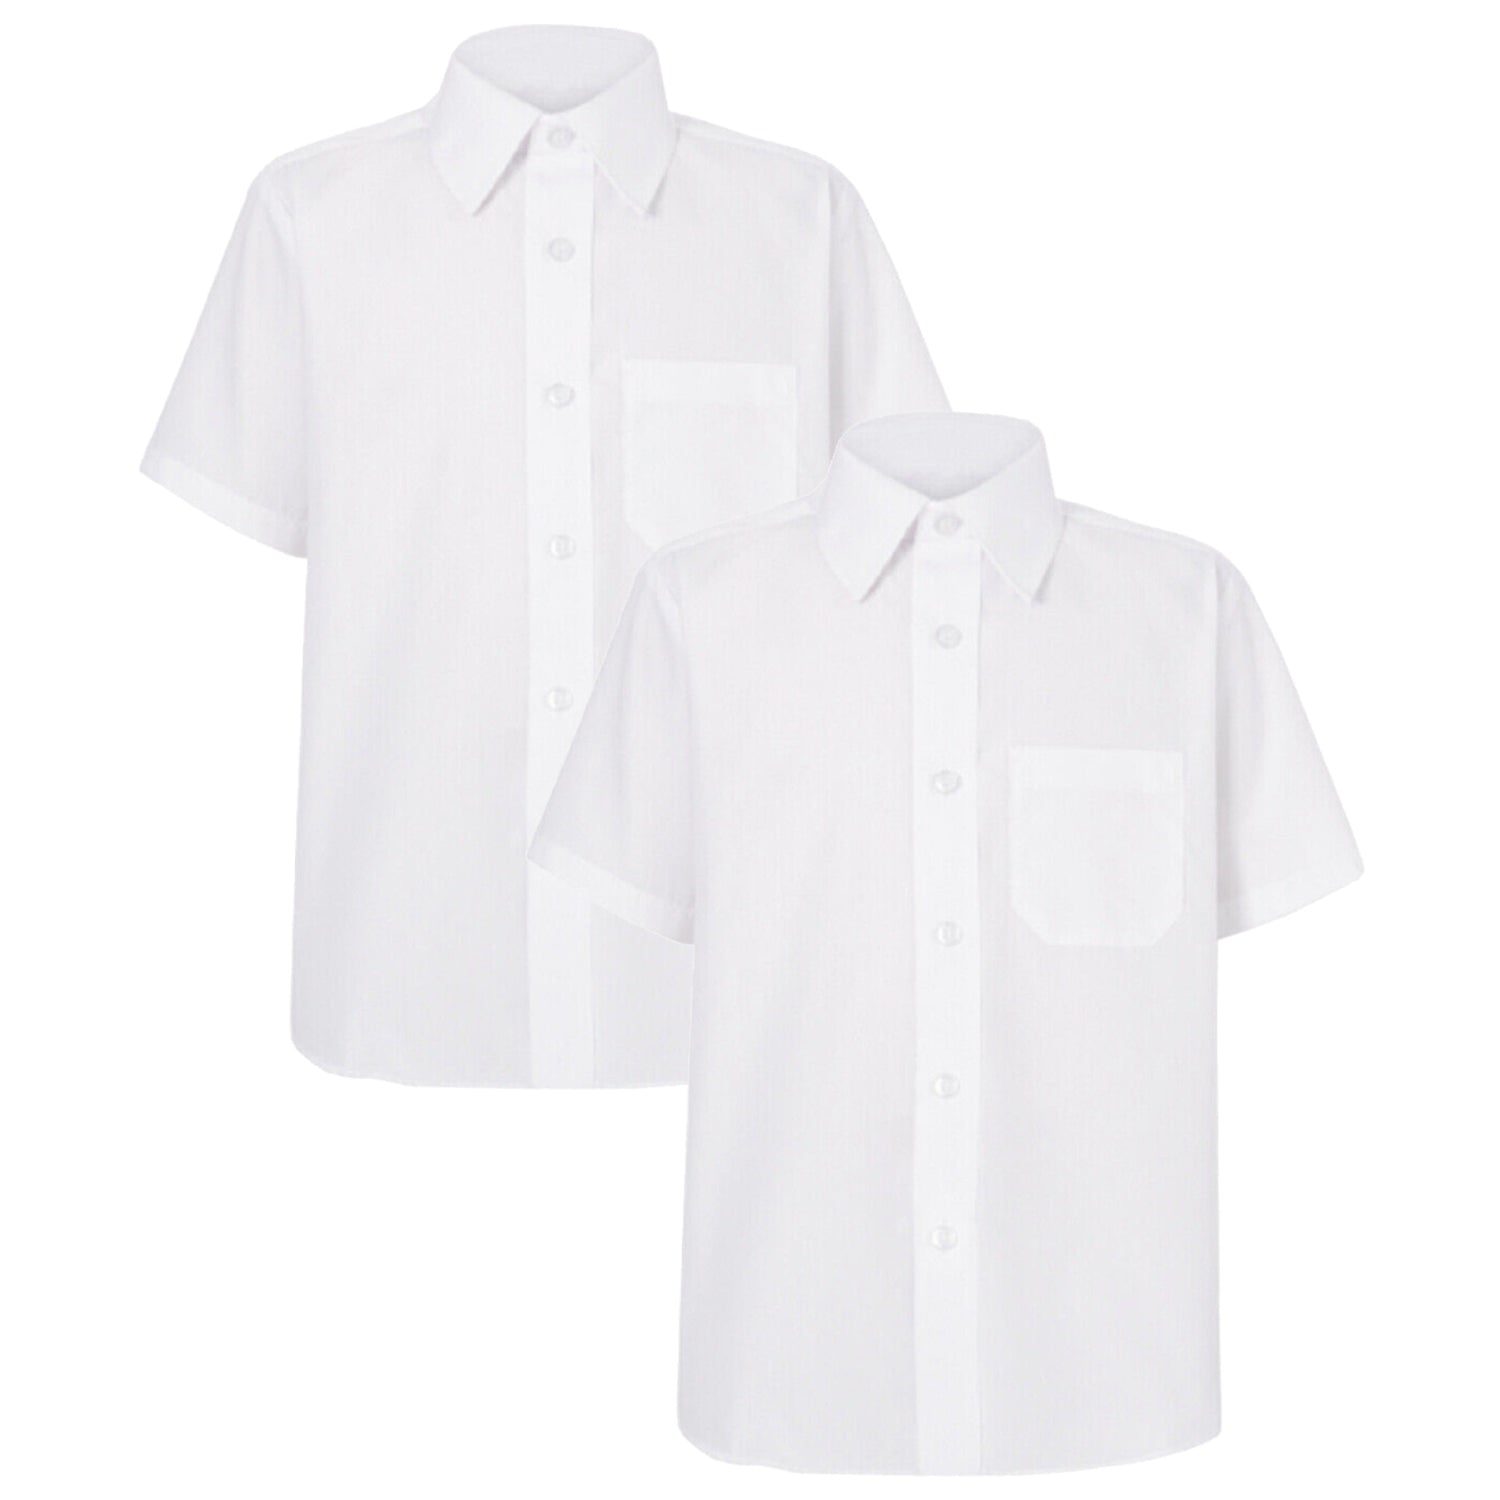 2 Pack Girls Poly Cotton Short Sleeve School Shirts White (3 - 16 Years)